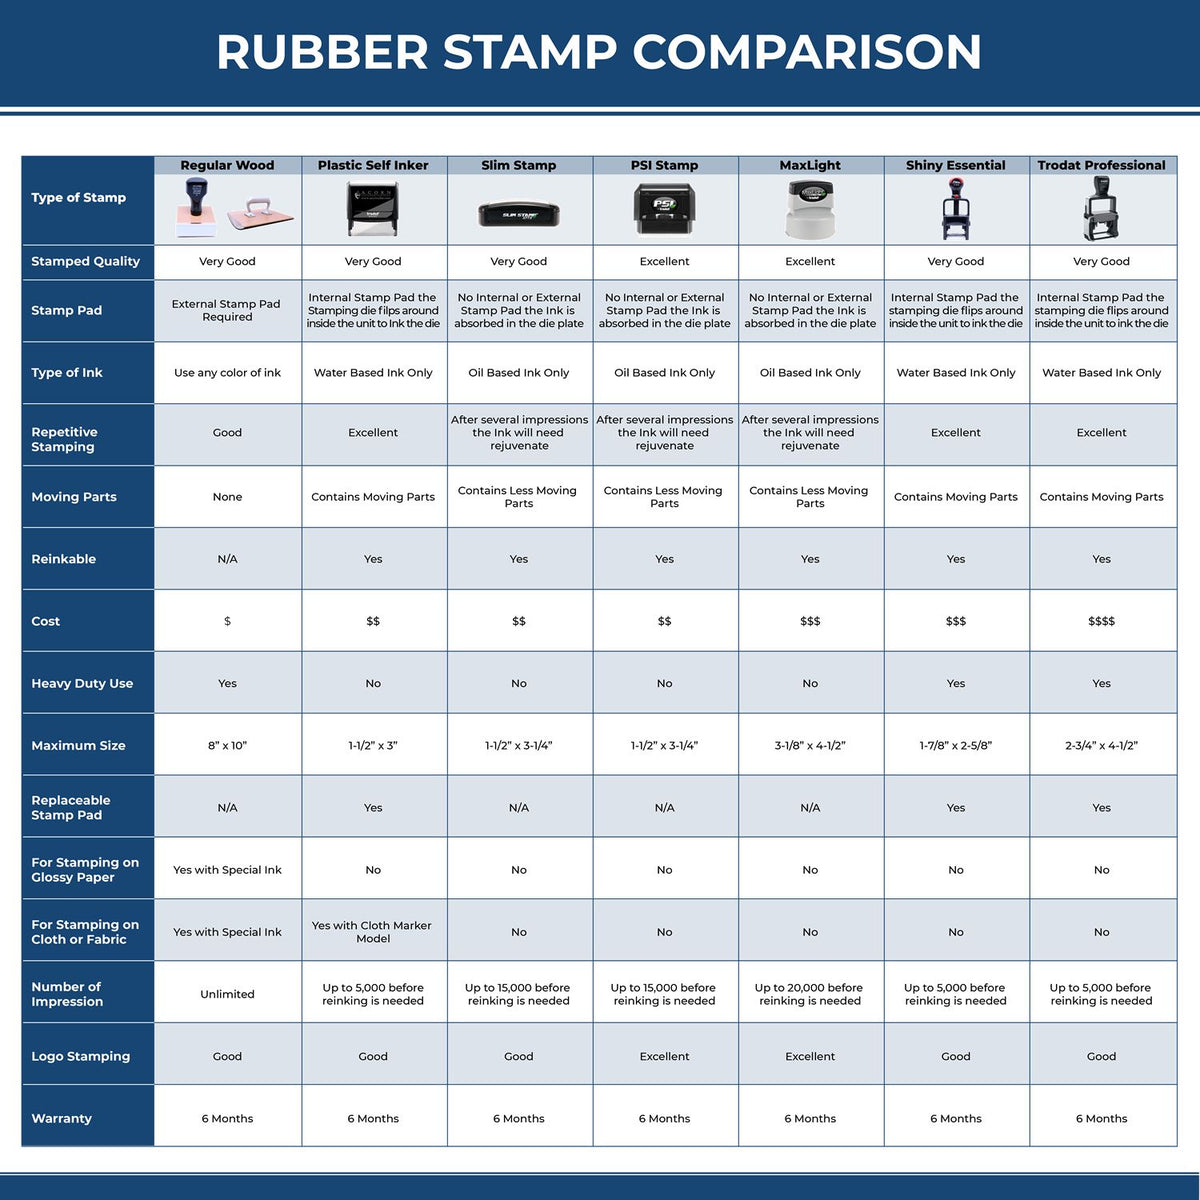 Large What Happened Rubber Stamp 5646R Rubber Stamp Comparison